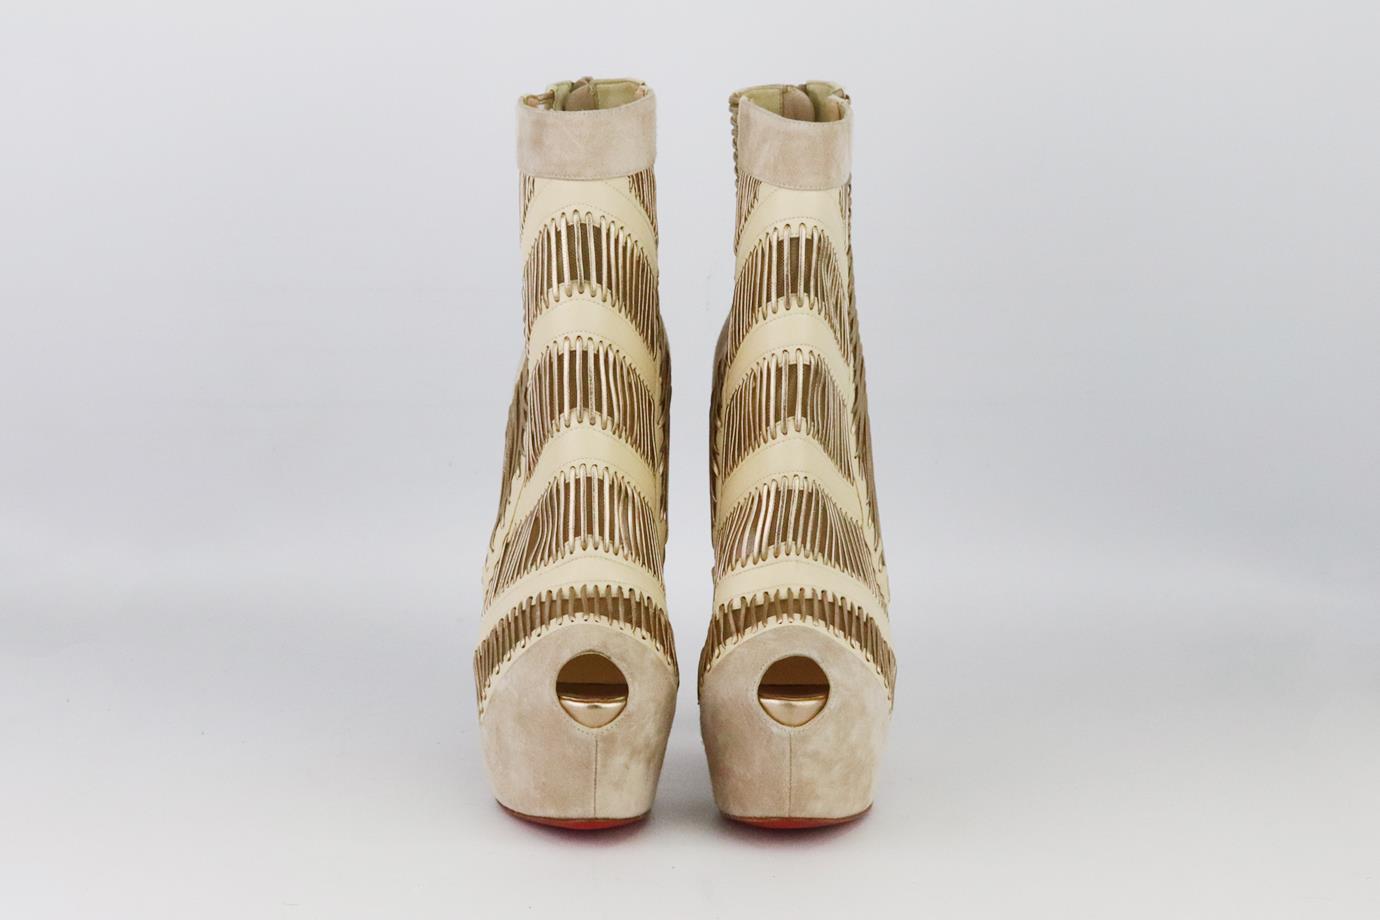 Christian Louboutin suede and leather platform ankle boots. Made from beige suede and leather with gold leather detail on platform sole and the brand’s iconic red sole. Beige and gold. Zip fastening at back. Does not come with box or dustbag. Size: